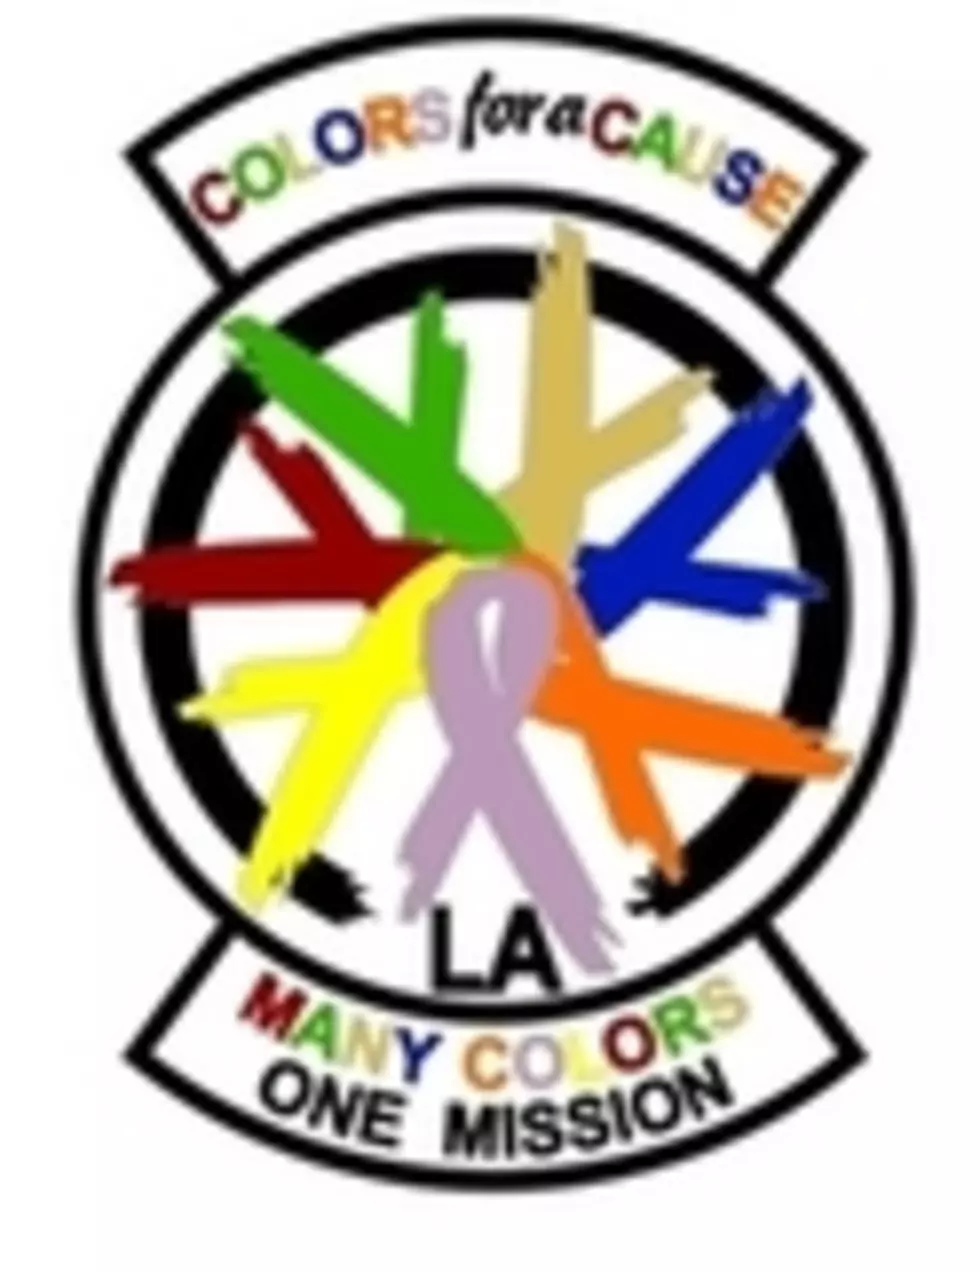 Don't Miss The Color For A Cause September 1st